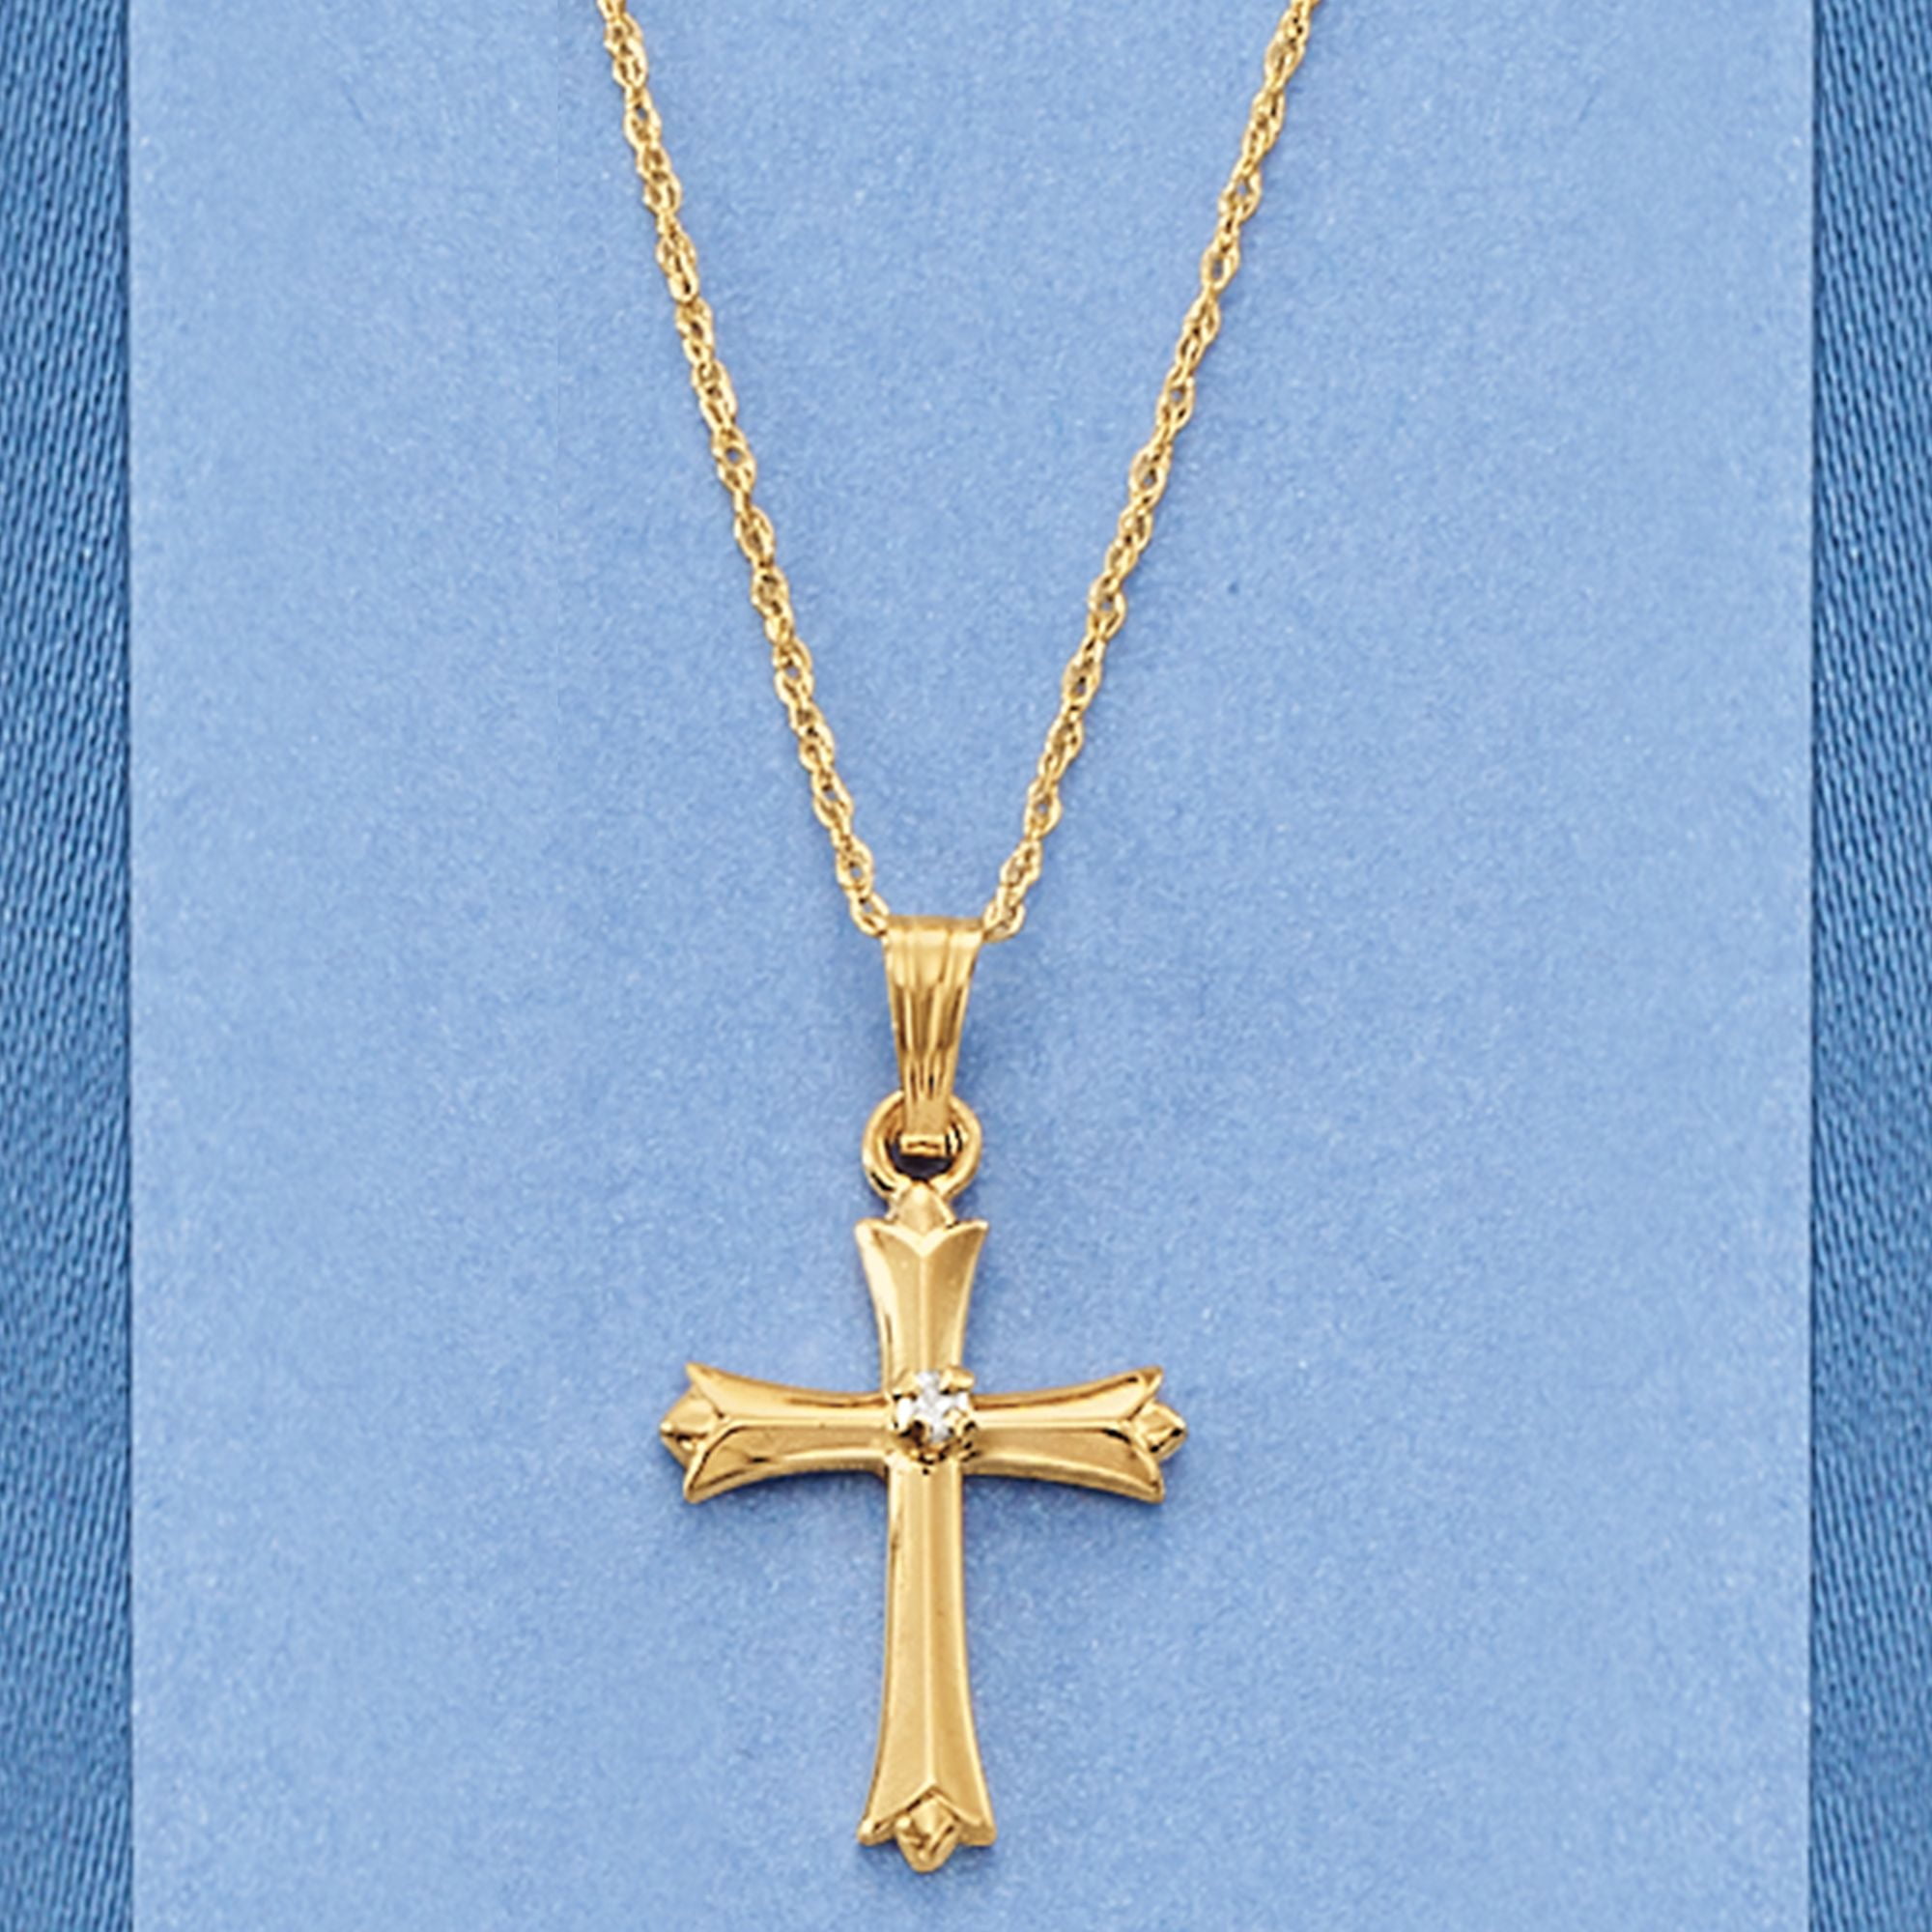 Kay Outlet Children's Cross Necklace | CoolSprings Galleria